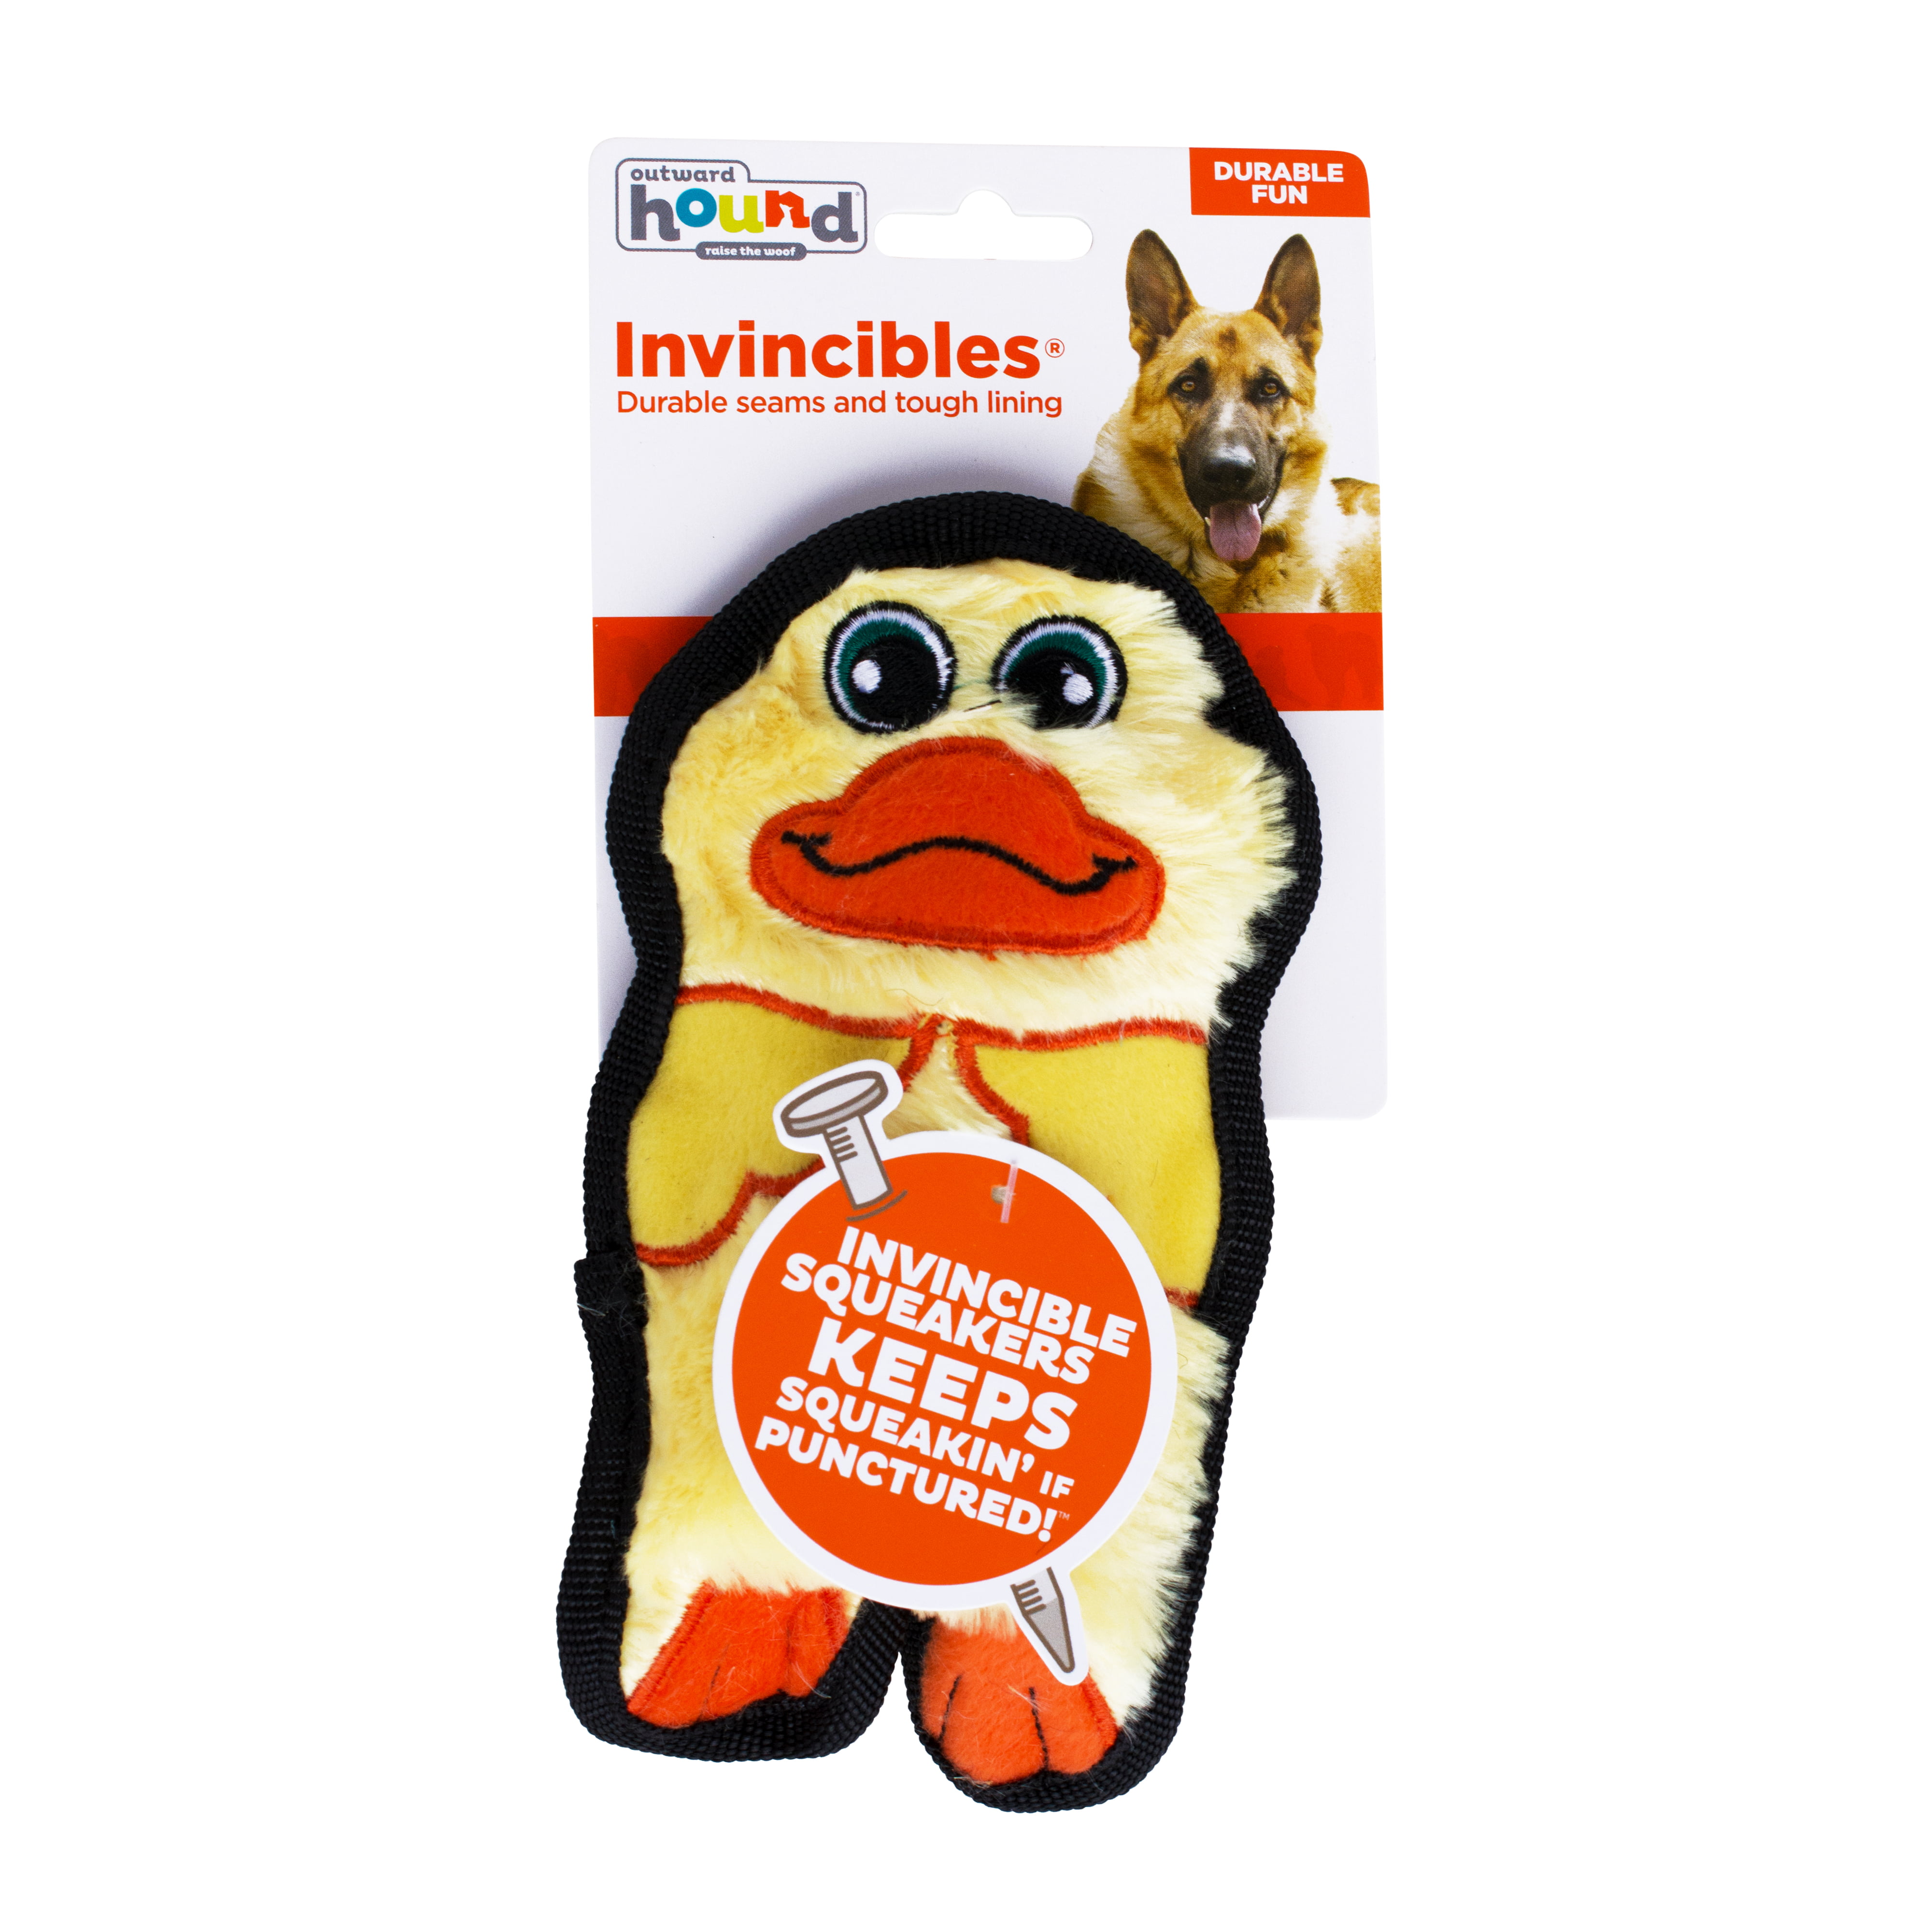 Outward Hound Invincibles Minis Puppy Dog Toy